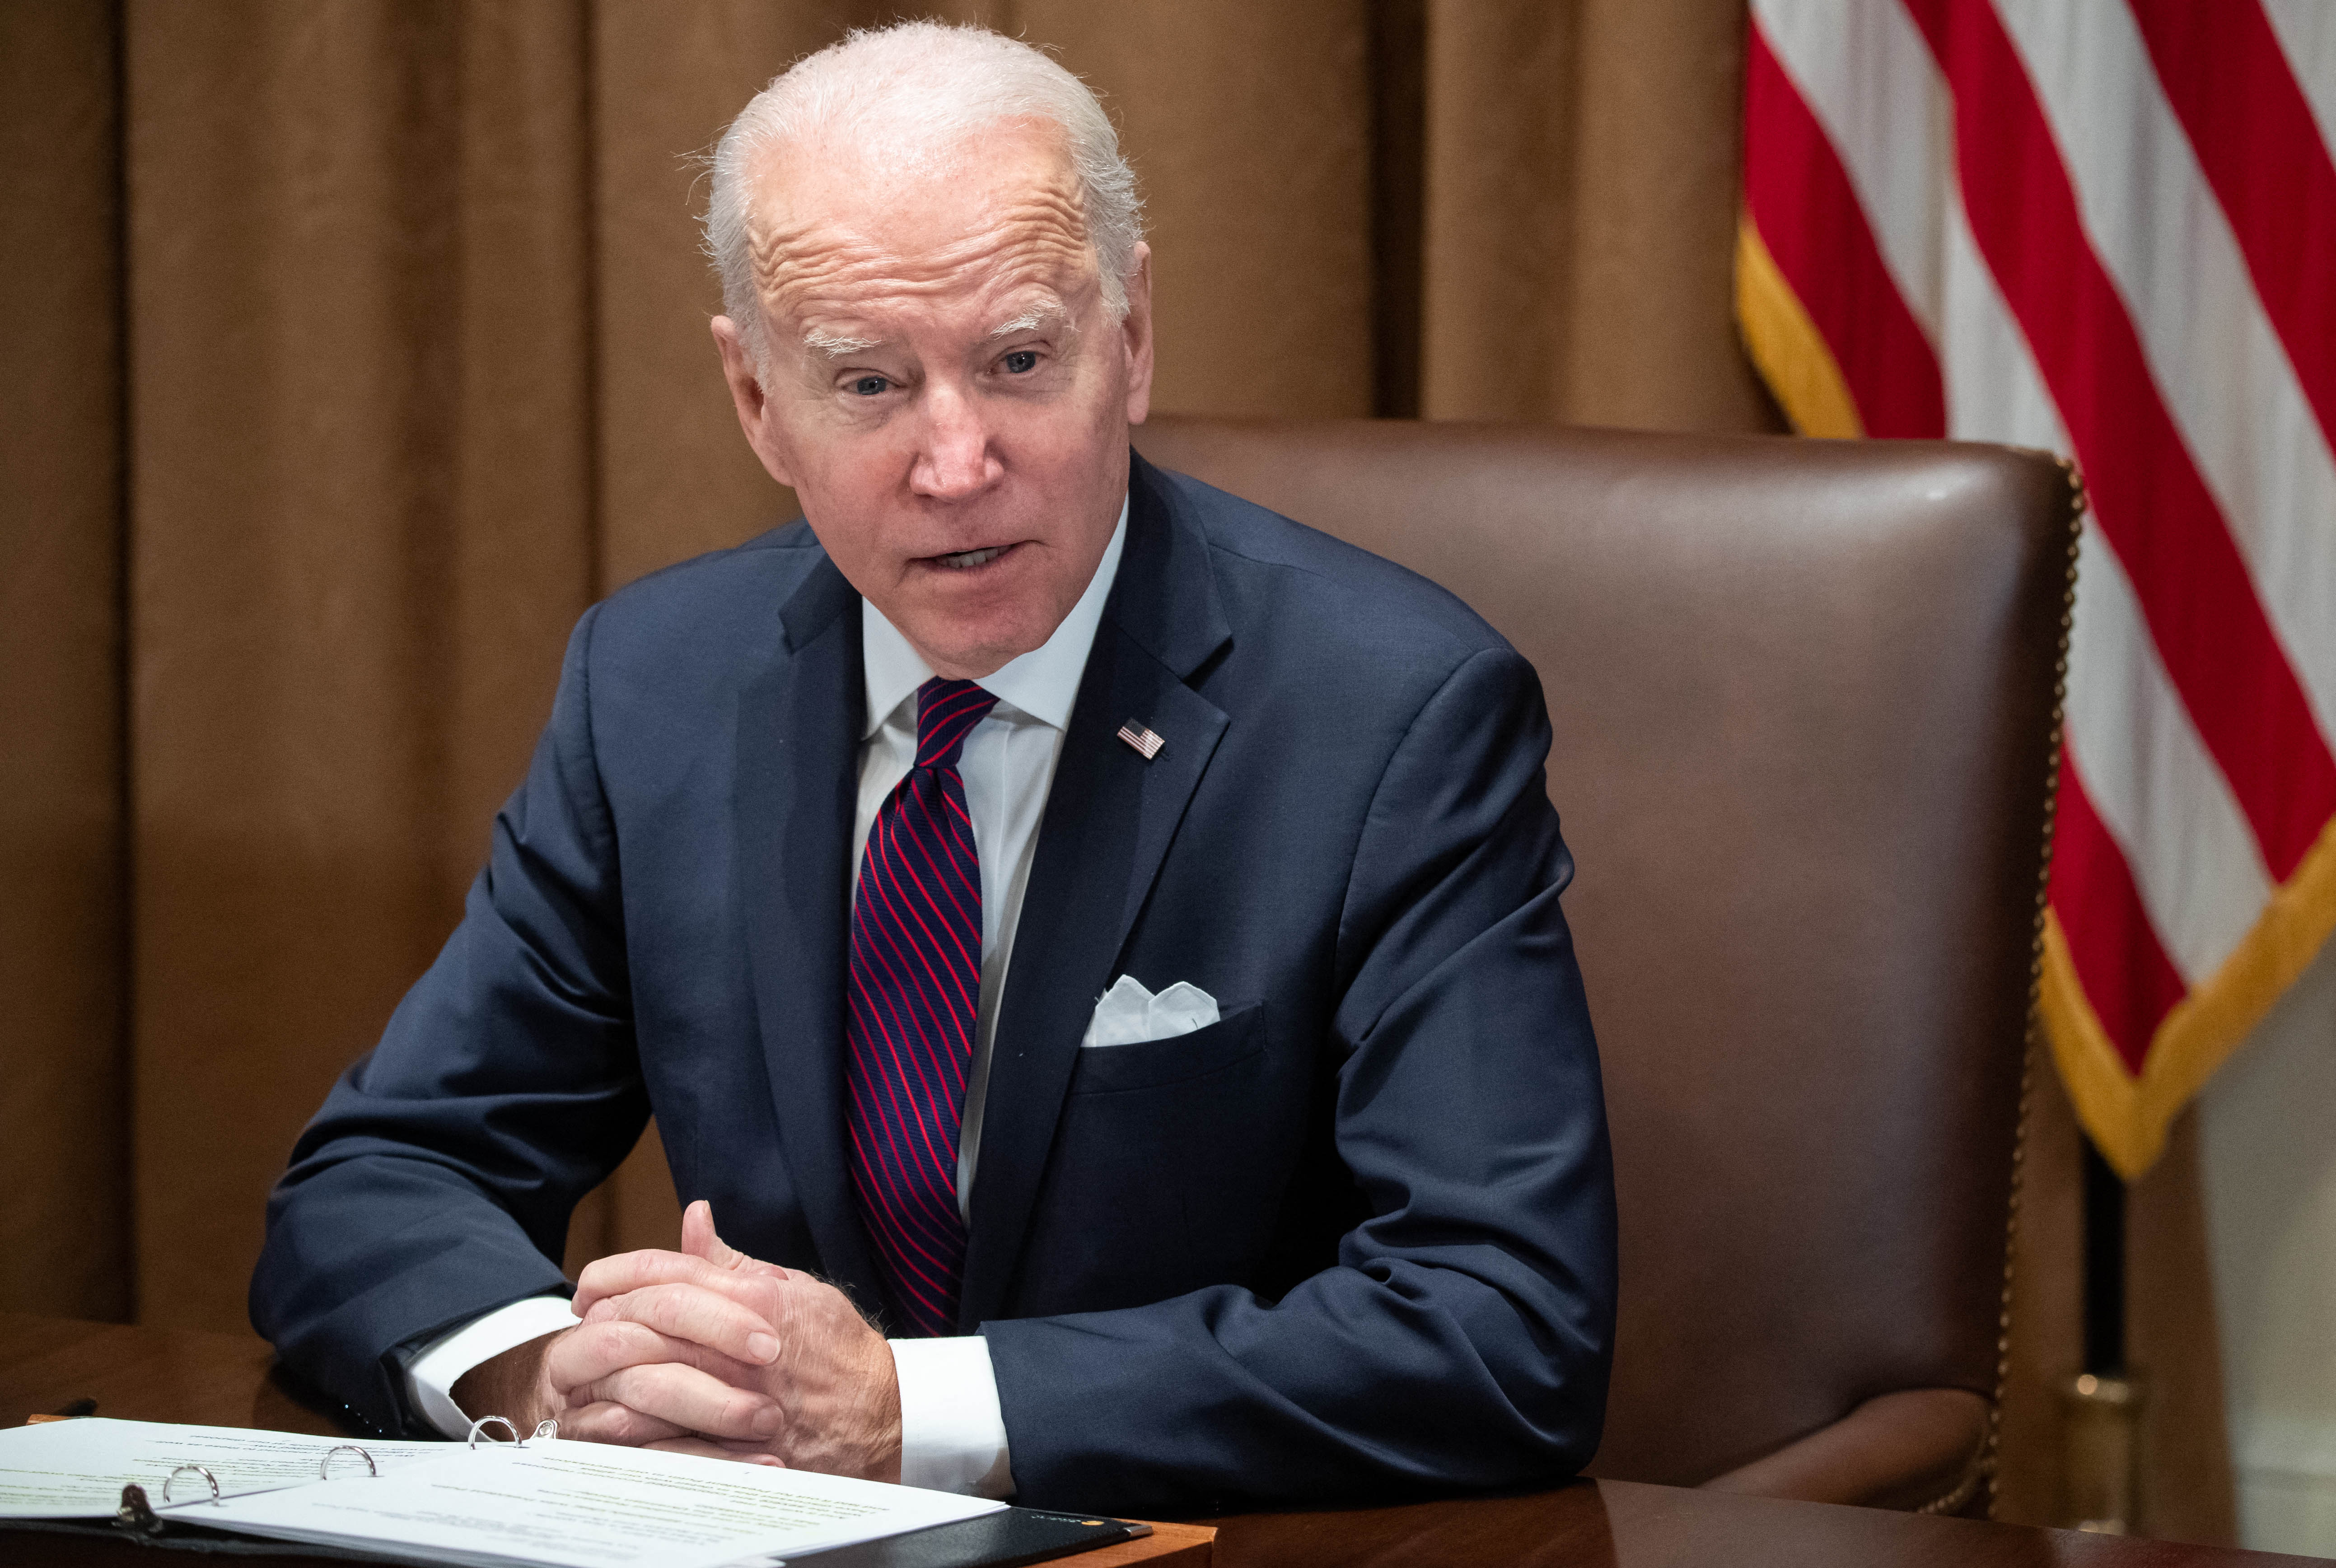 US President Joe Biden speaks about Russia and Ukraine prior to a meeting with members of the Infrastructure Implementation Task Force to discuss the Bipartisan Infrastructure Law, in the Cabinet Room of the White House in Washington, DC, on 20 January.